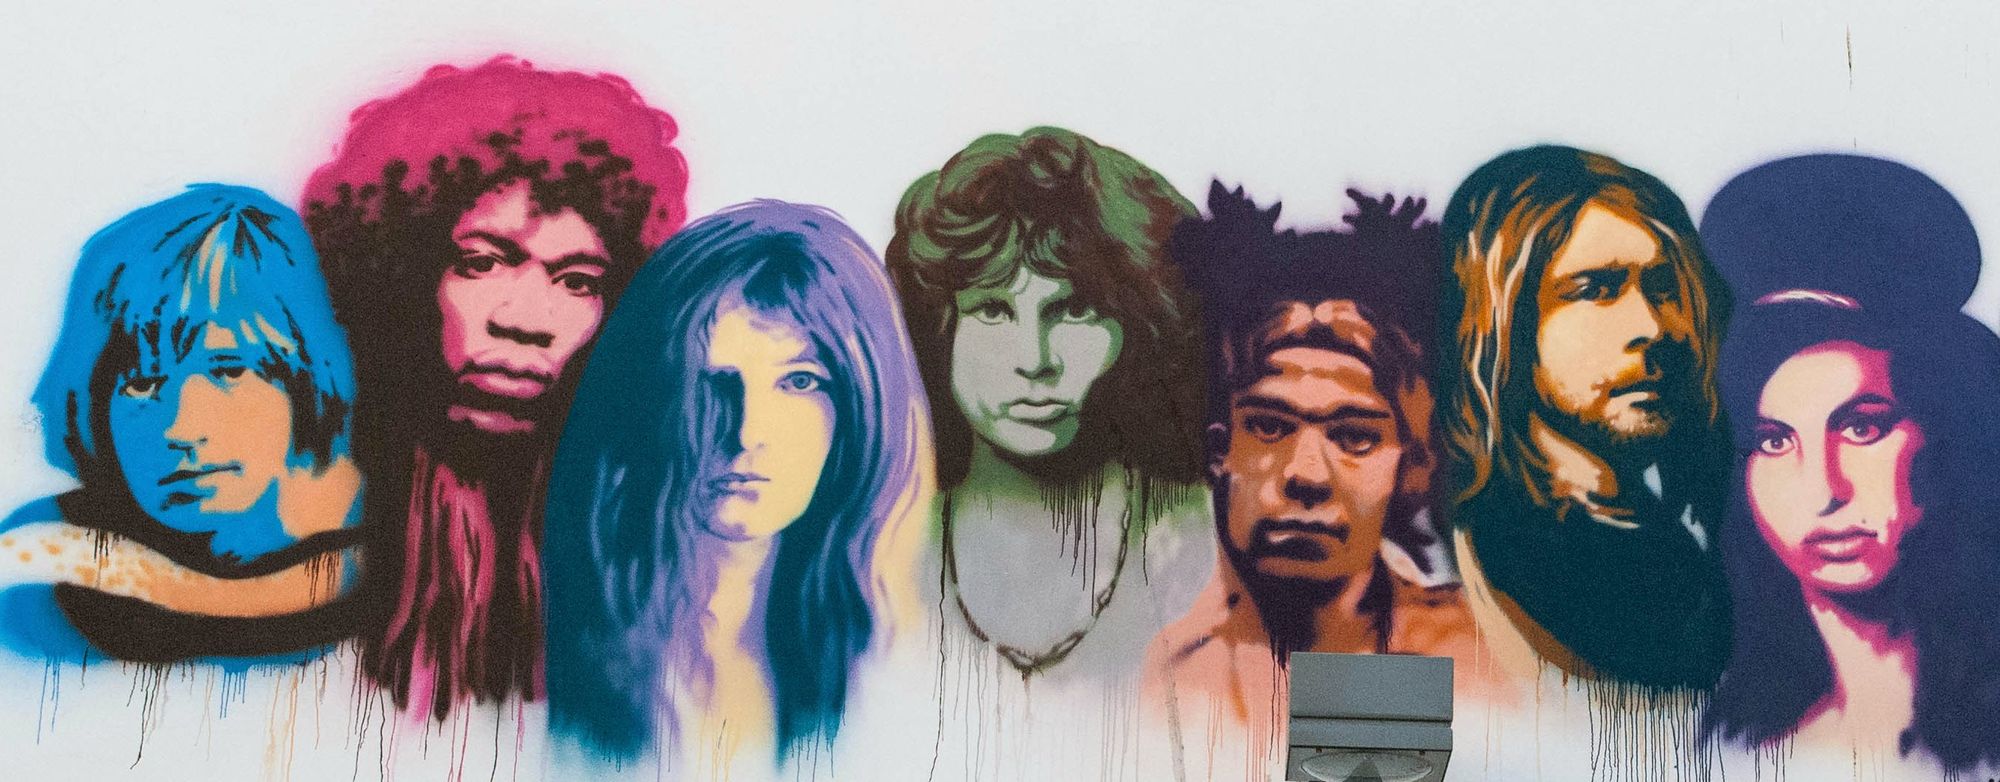 The Under 27 Club: Music and Mental Health in the Streaming Era